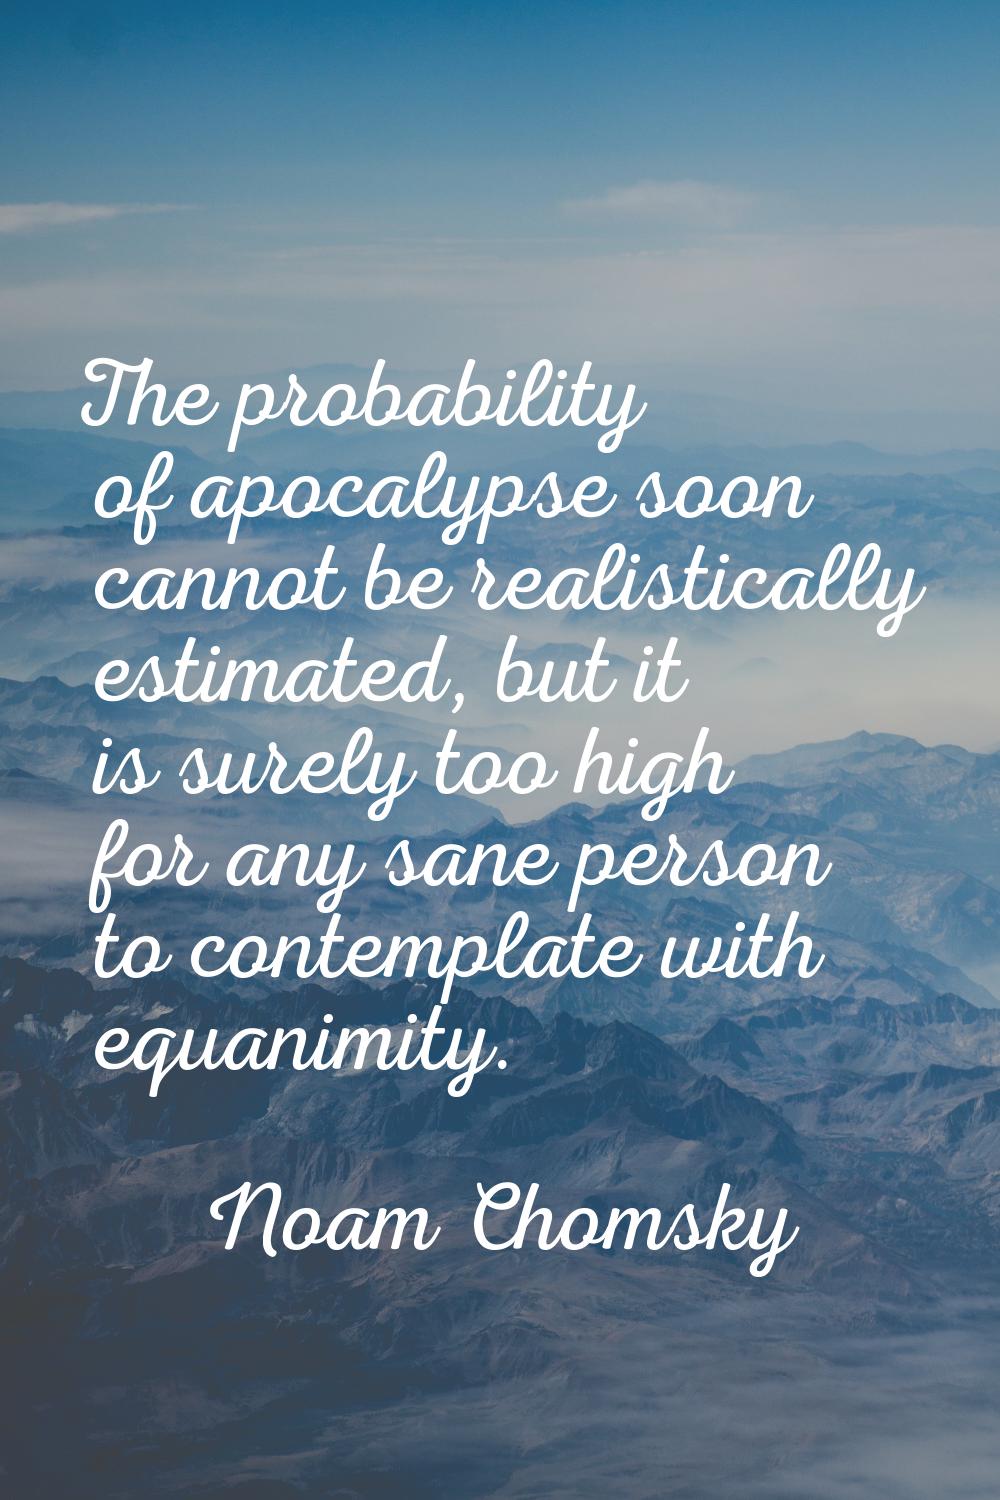 The probability of apocalypse soon cannot be realistically estimated, but it is surely too high for